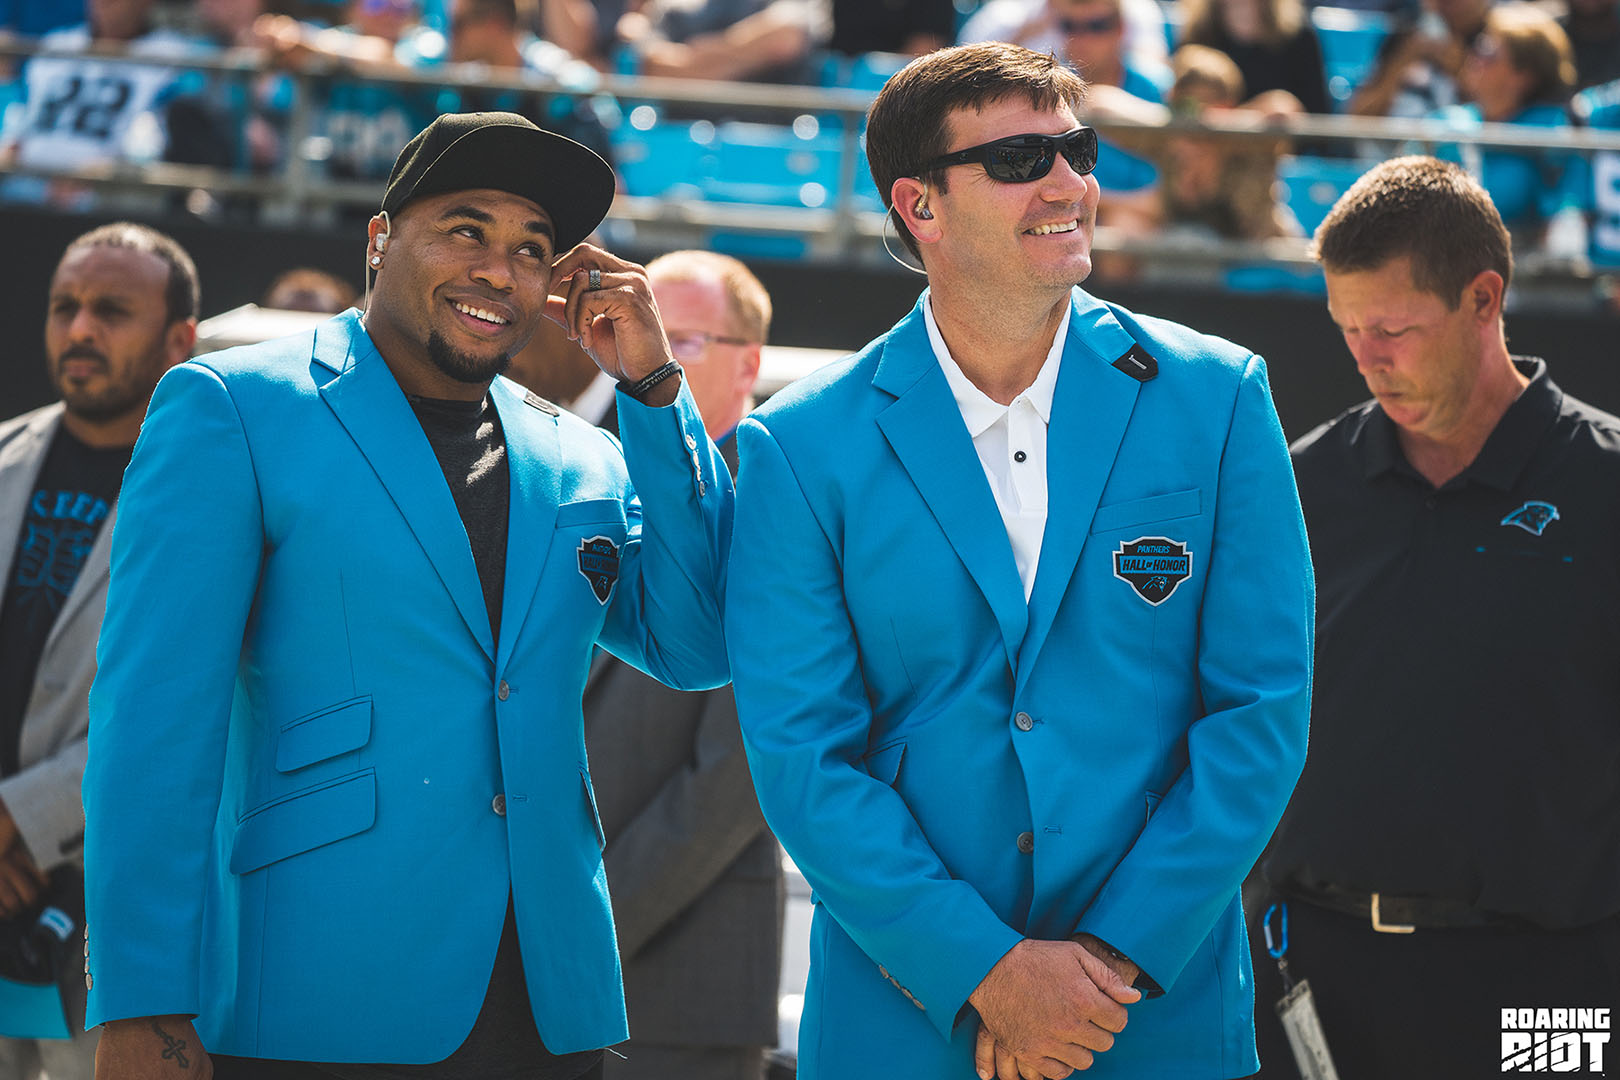 Charlotte’s NFL Stars Are An Example Of What Panthers Success Can Achieve